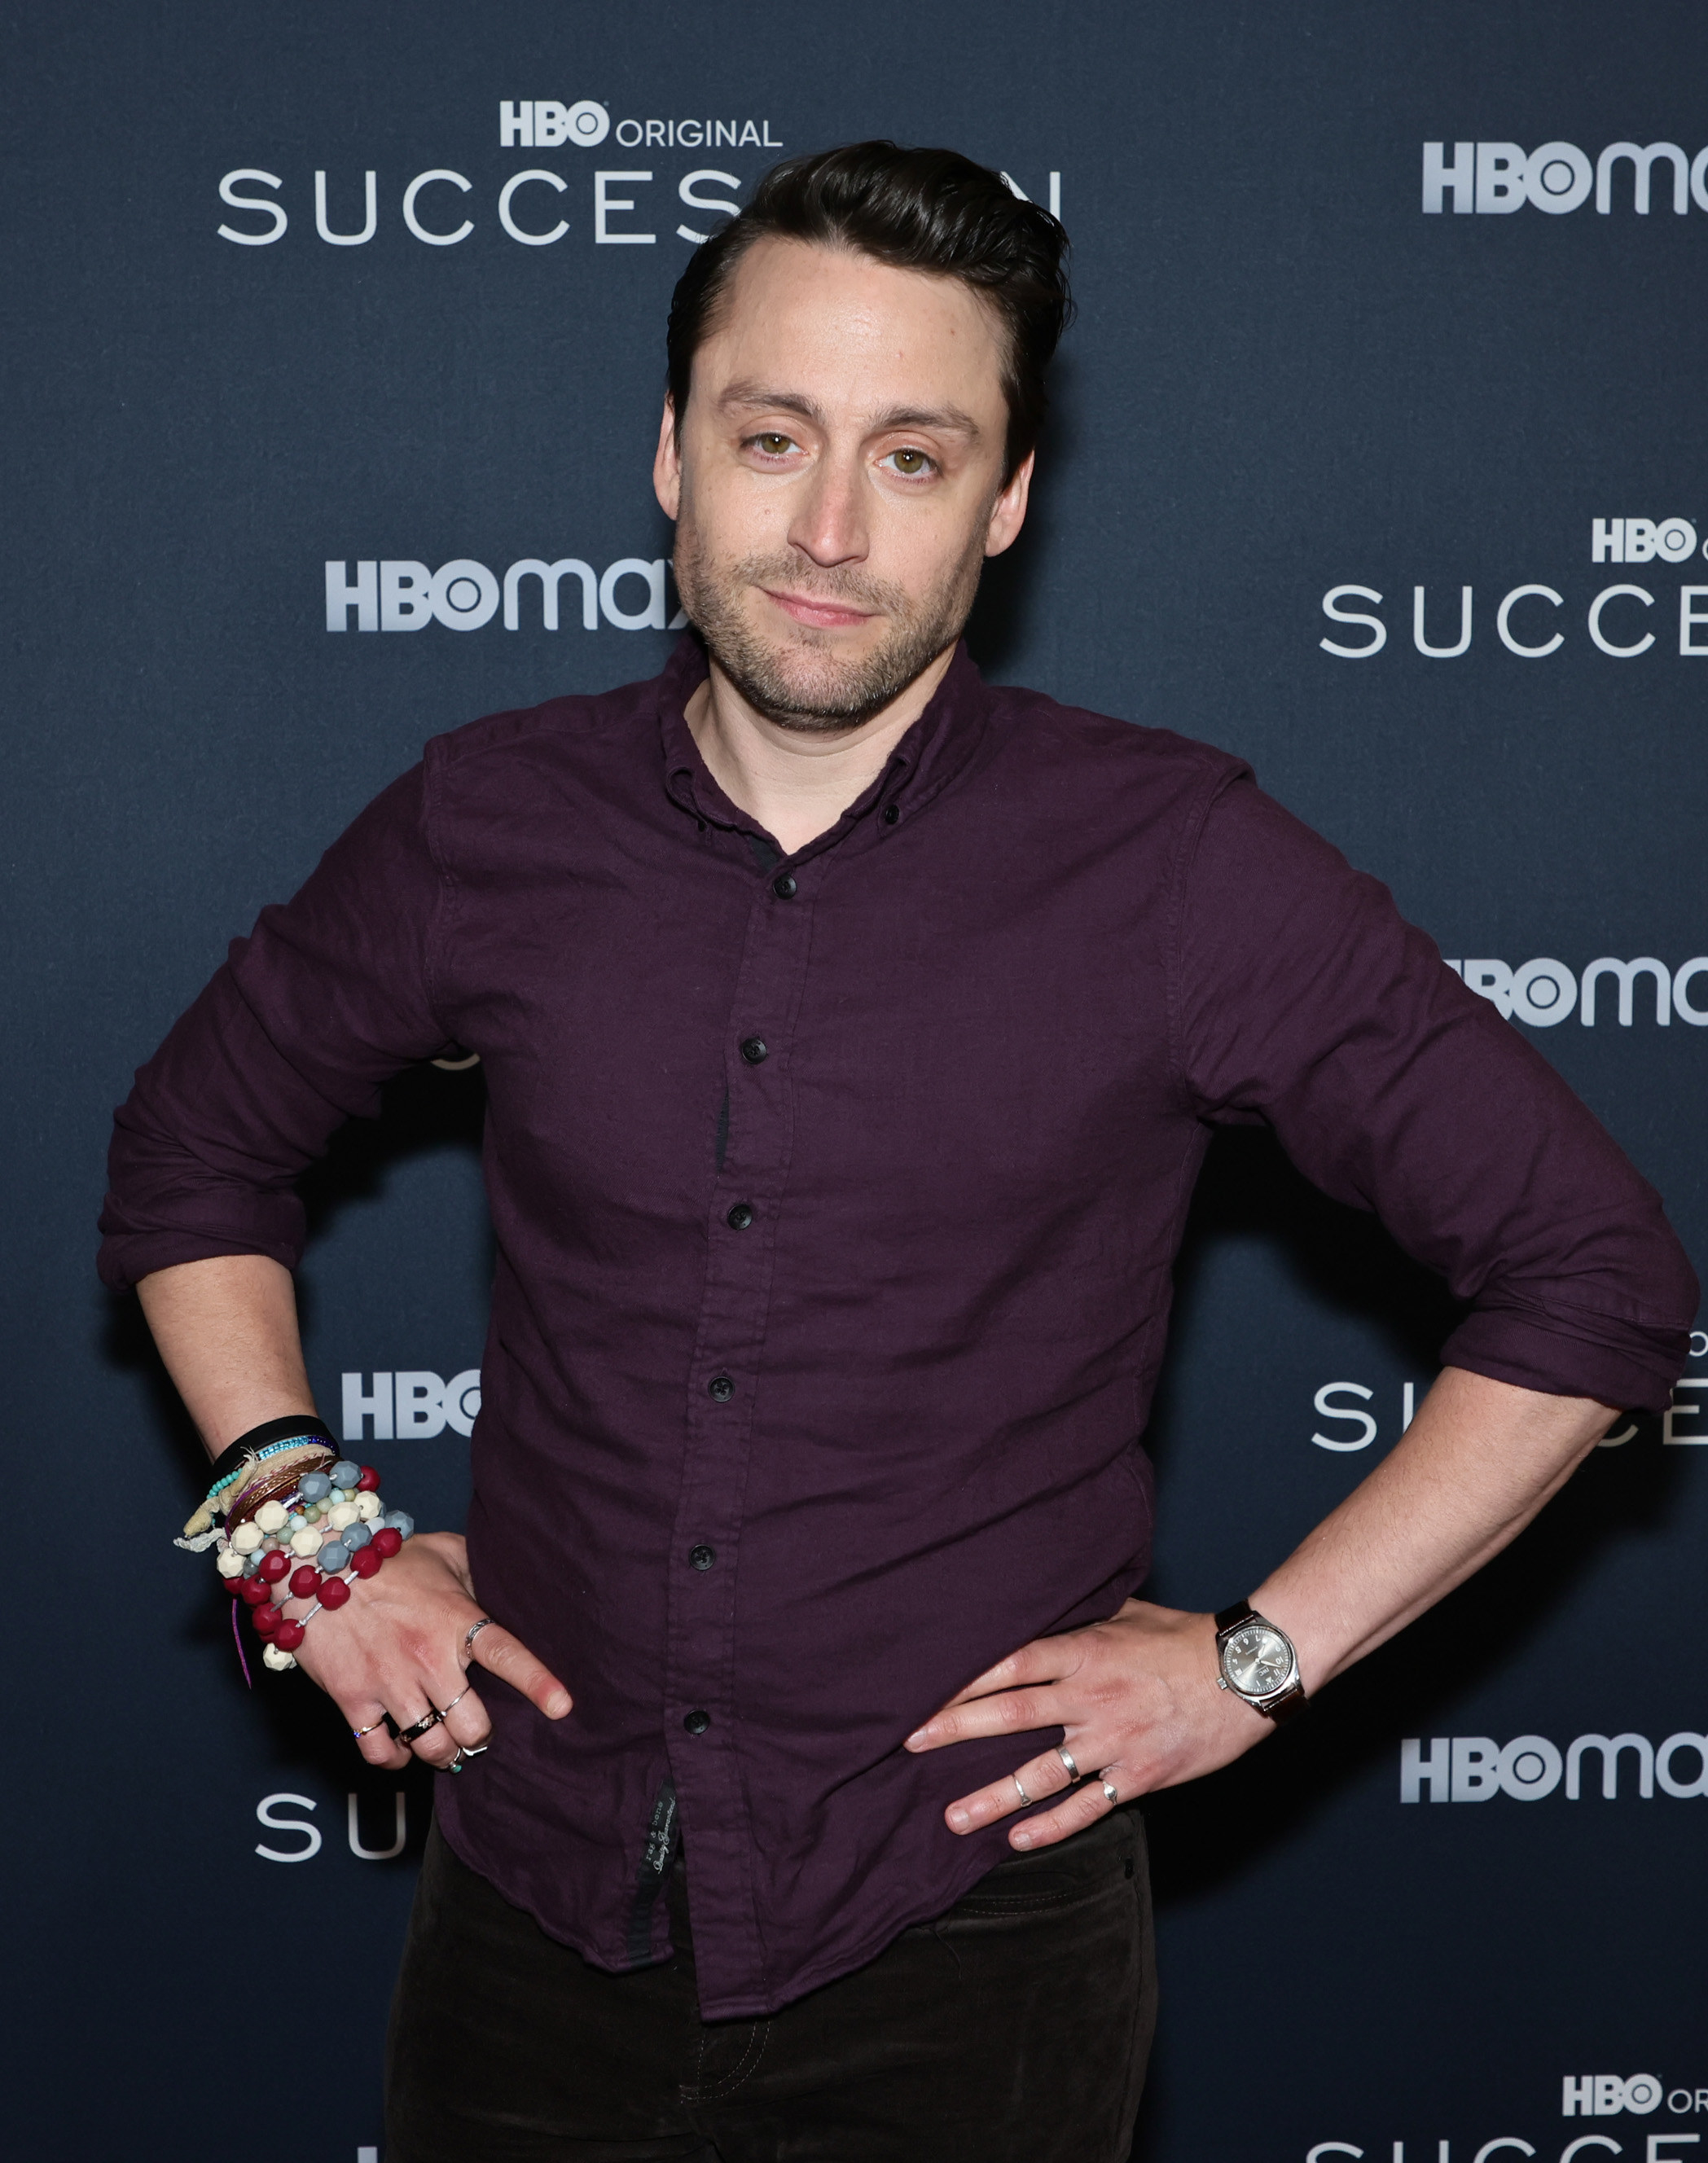 Culkin wearing a shirt with the sleeves rolled up and with hands on hips on the red carpet